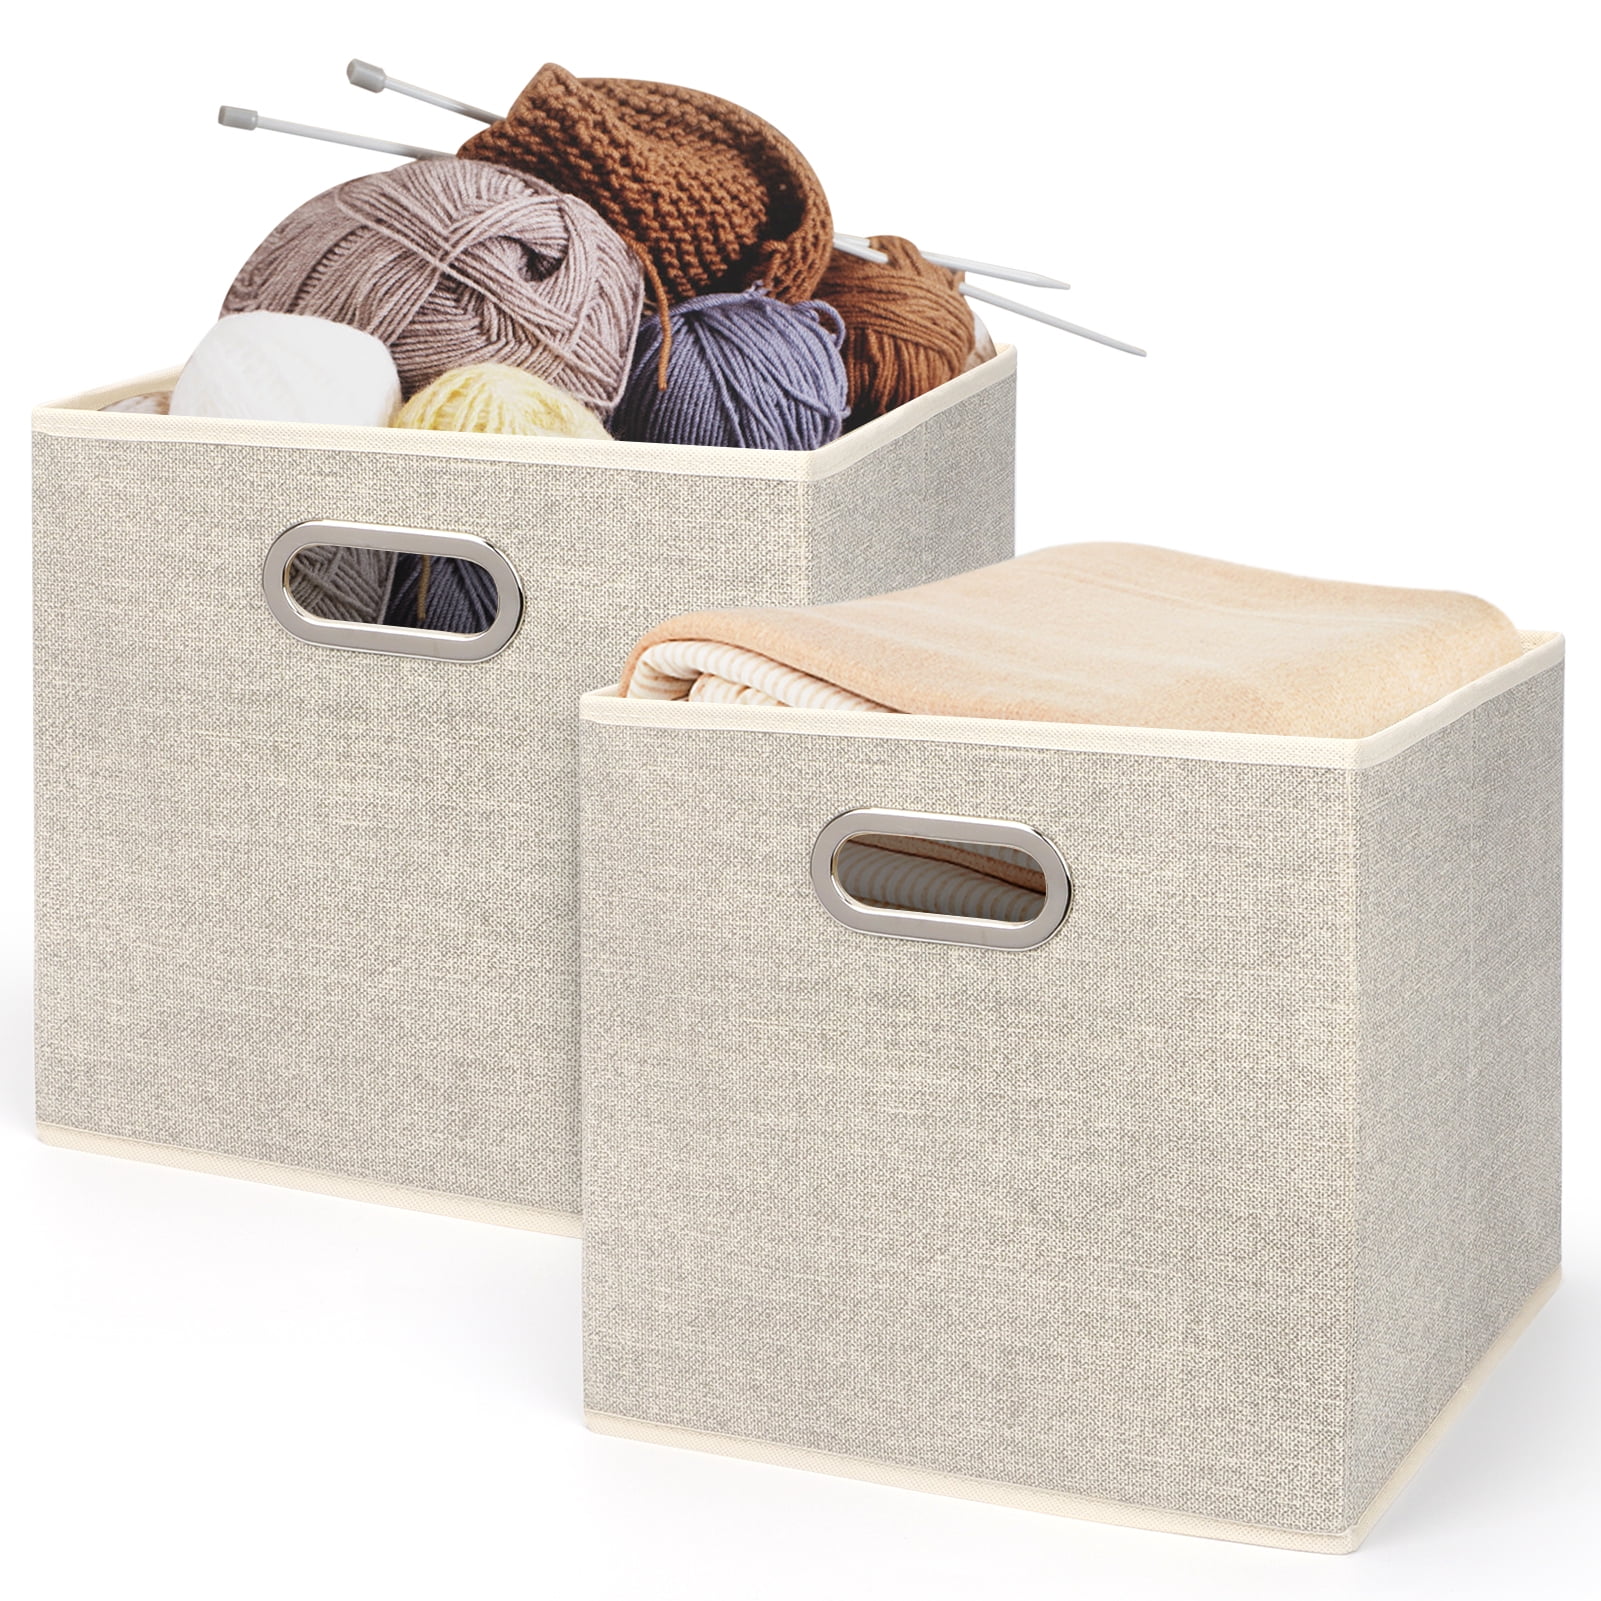  KOKNIT Collapsible Yarn Storage Bin, Yarn Basket Organizer Cube  with Dual Handles for Shelves, Home and Office, Best Gift for Knitter and  Crocheter